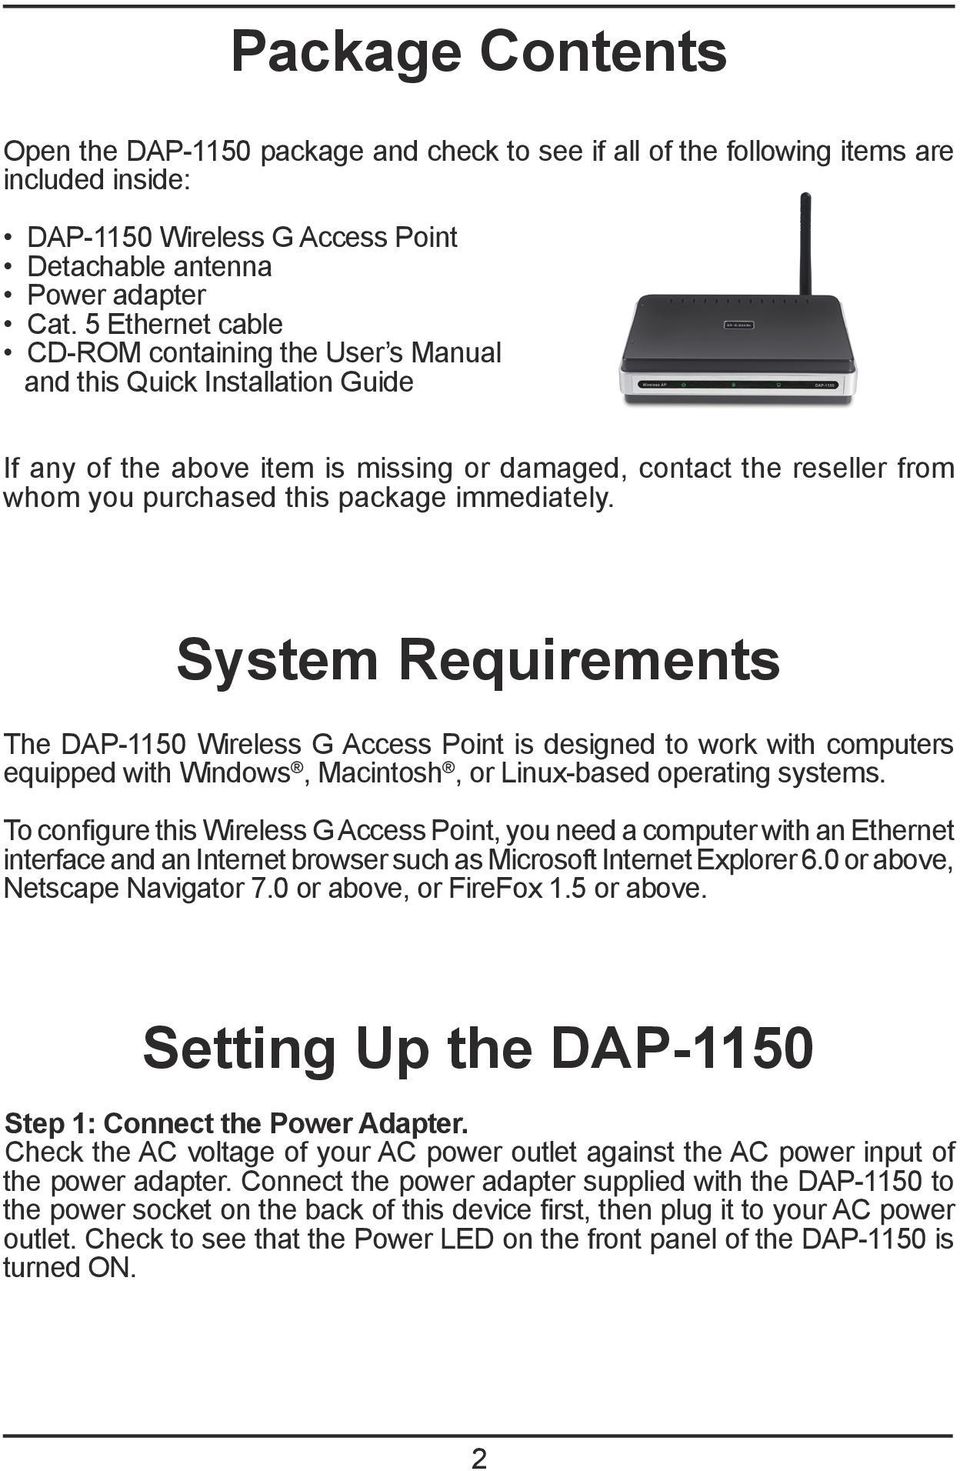 immediately. System Requirements The DAP-1150 Wireless G Access Point is designed to work with computers equipped with Windows, Macintosh, or Linux-based operating systems.